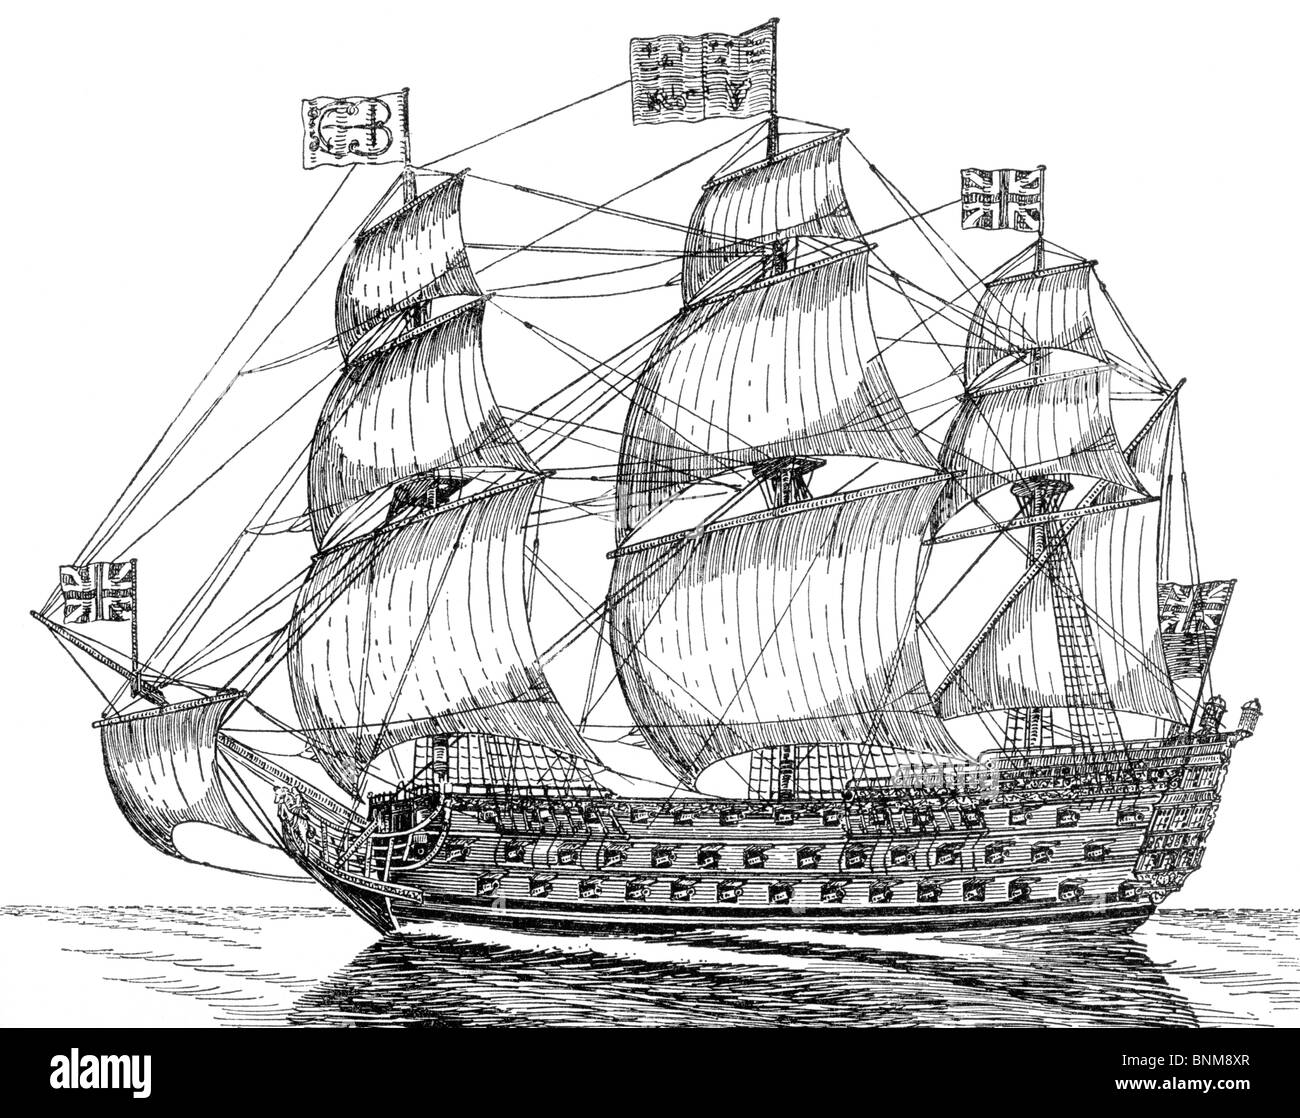 Black and White Illustration of HMS Royal George; 18th Century Naval Ship Stock Photo